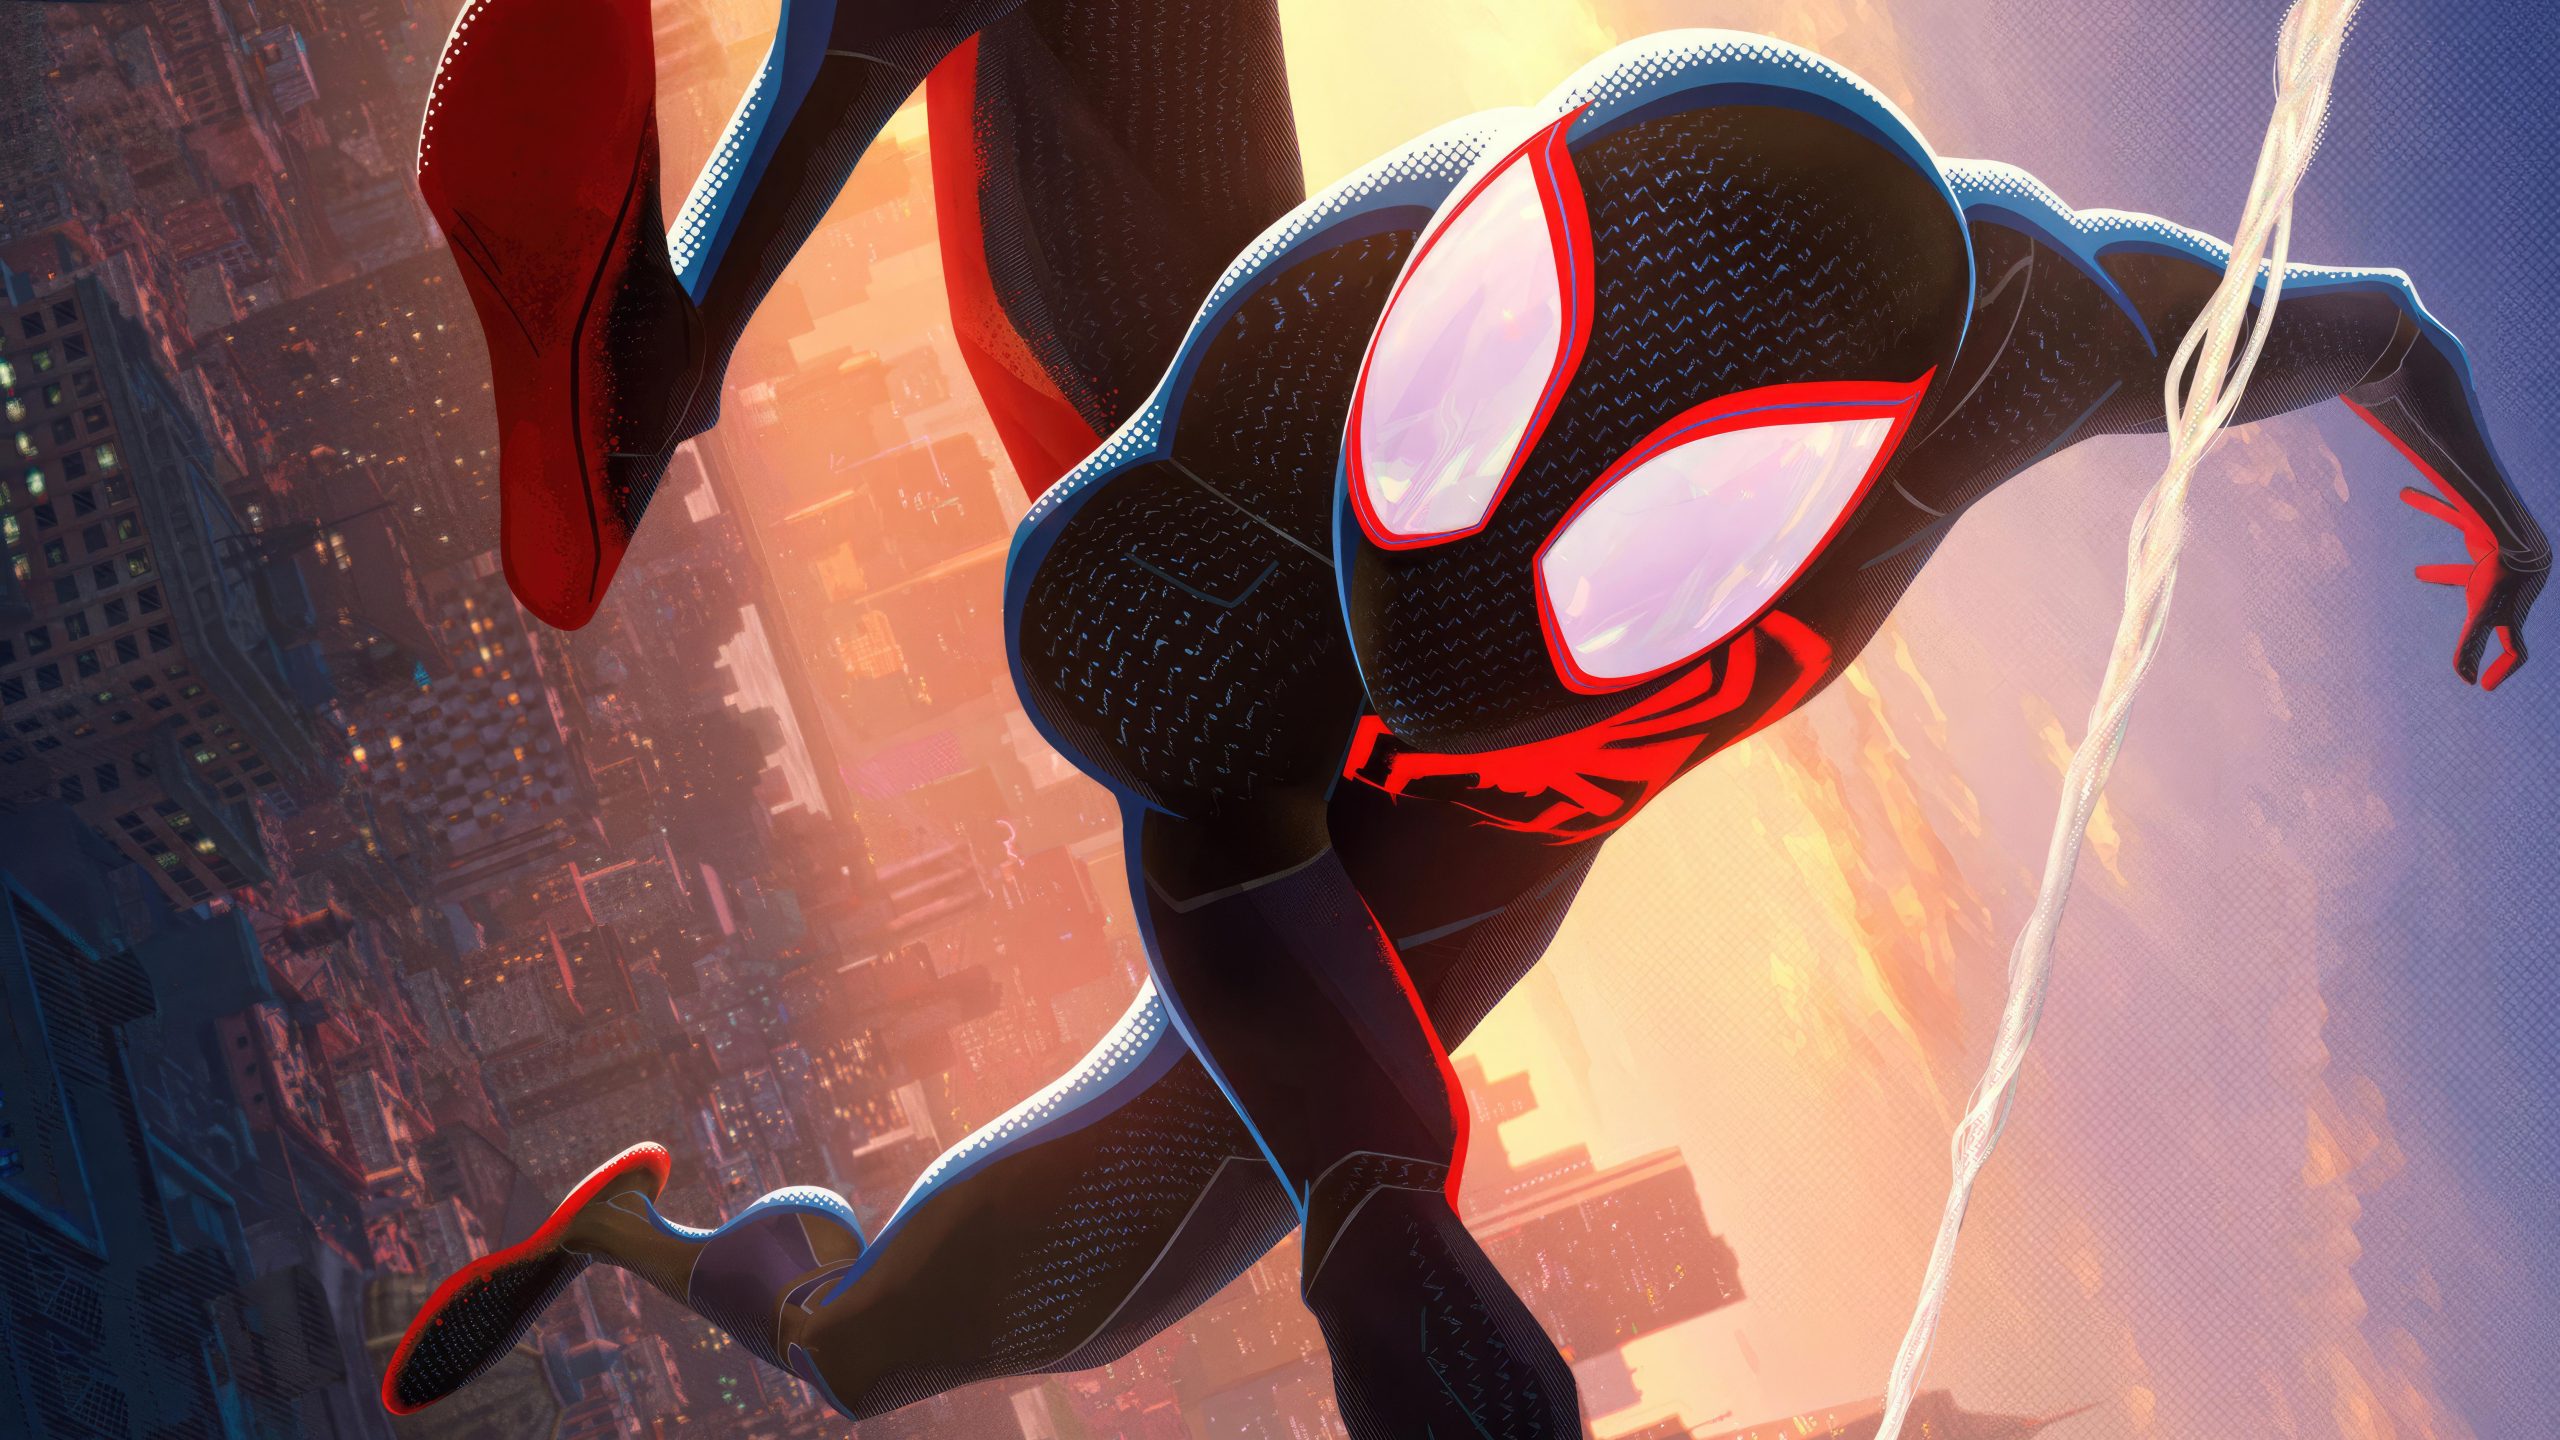 Miles Morales Spider-Man Across The Spider-Verse Wallpaper Download, Miles Morales Spider-Man Across The Spider-Verse, Movies